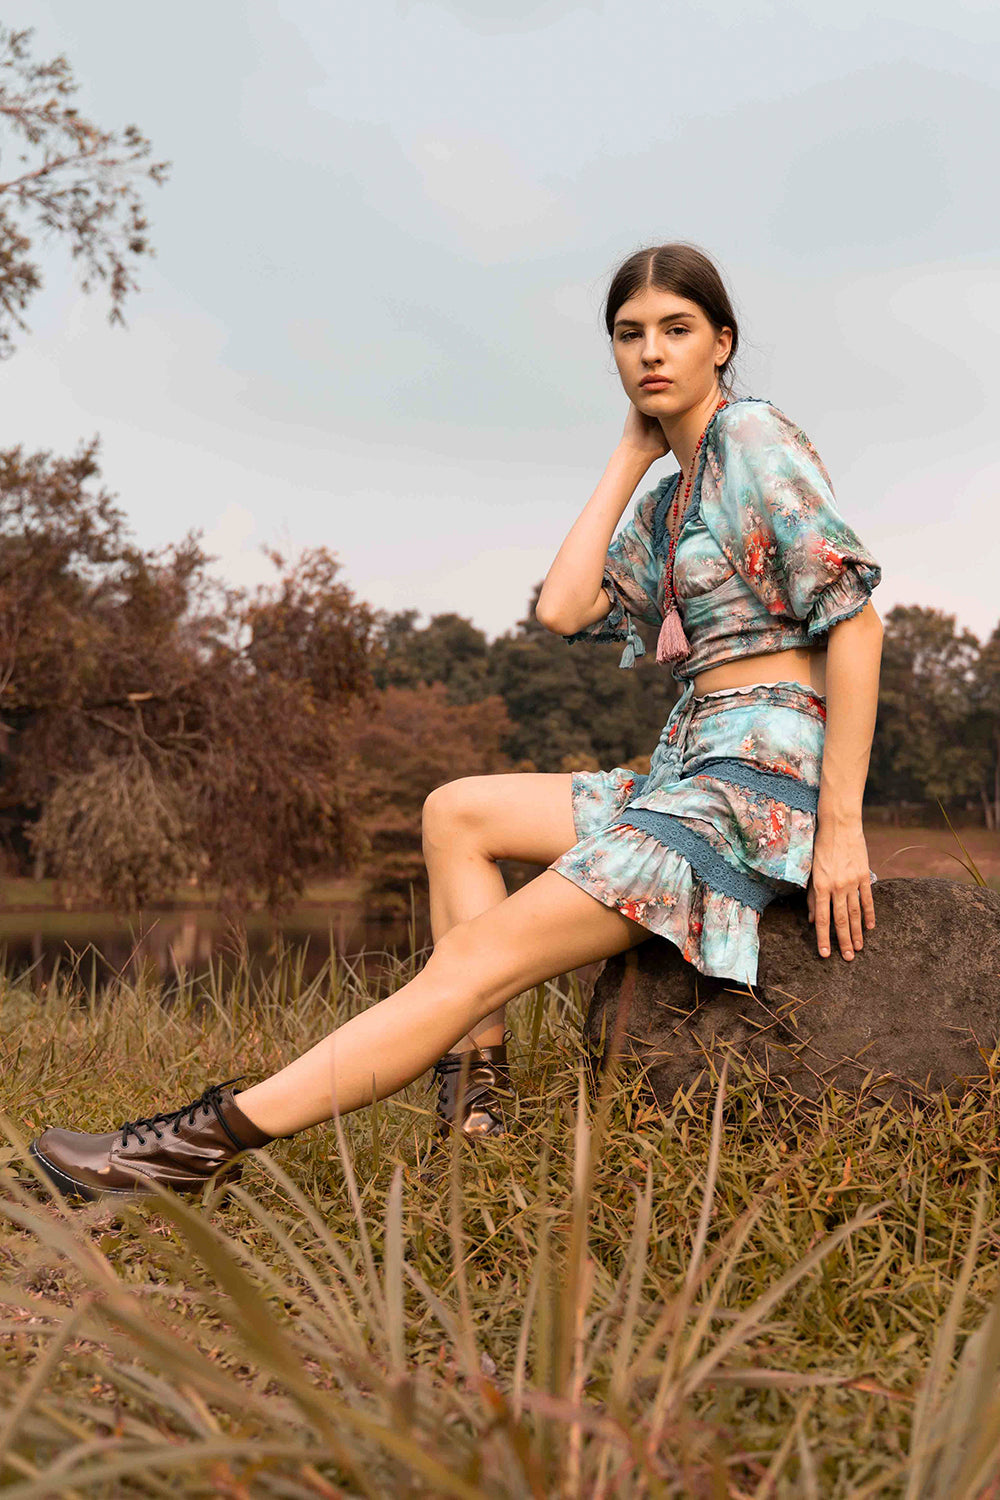 Aveline Mini Skirt, handmade with sustainable materials, perfect for the modern boho enthusiast